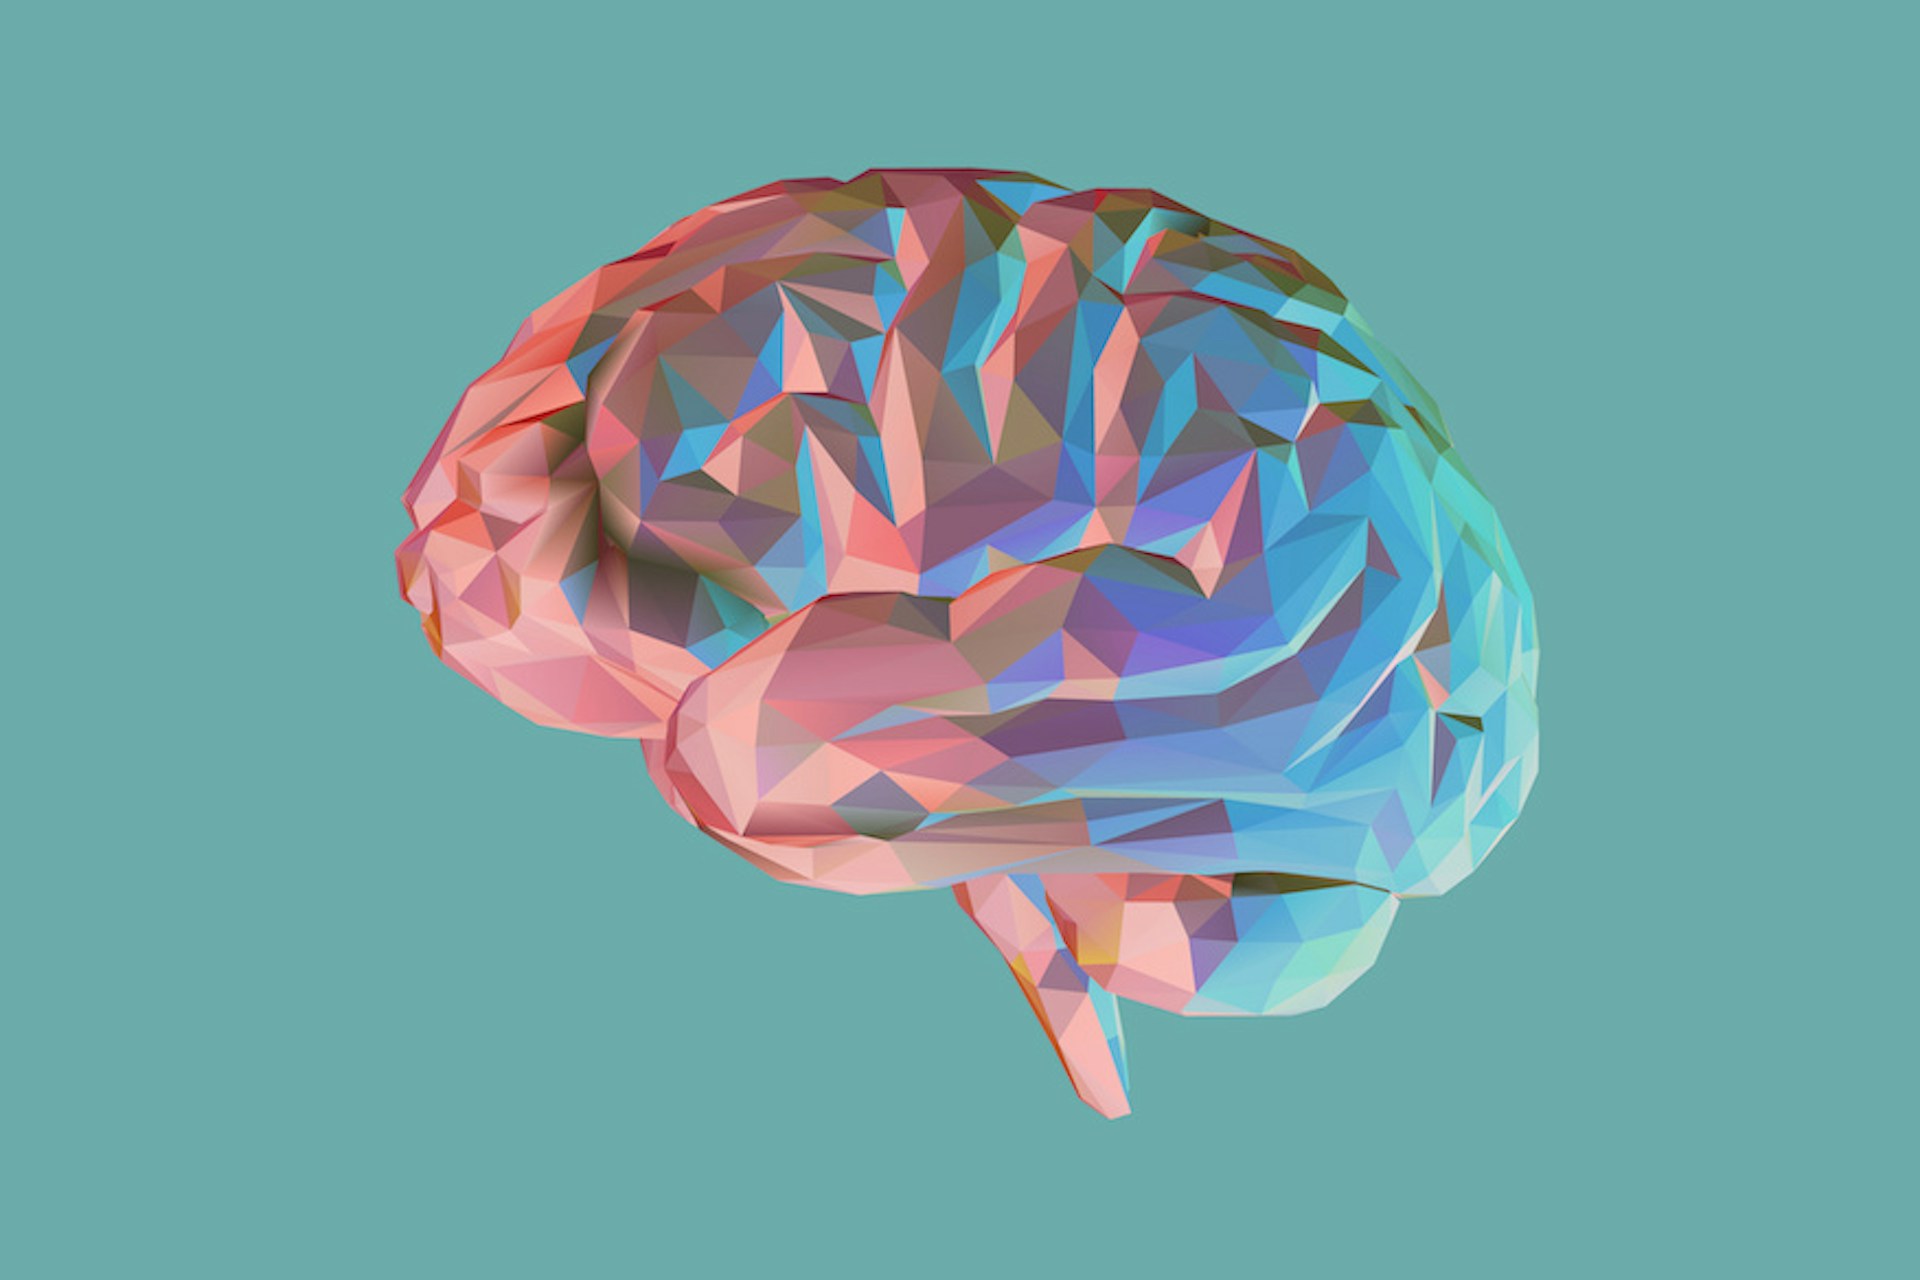 You can see a 3D animated brain in front of a teal background